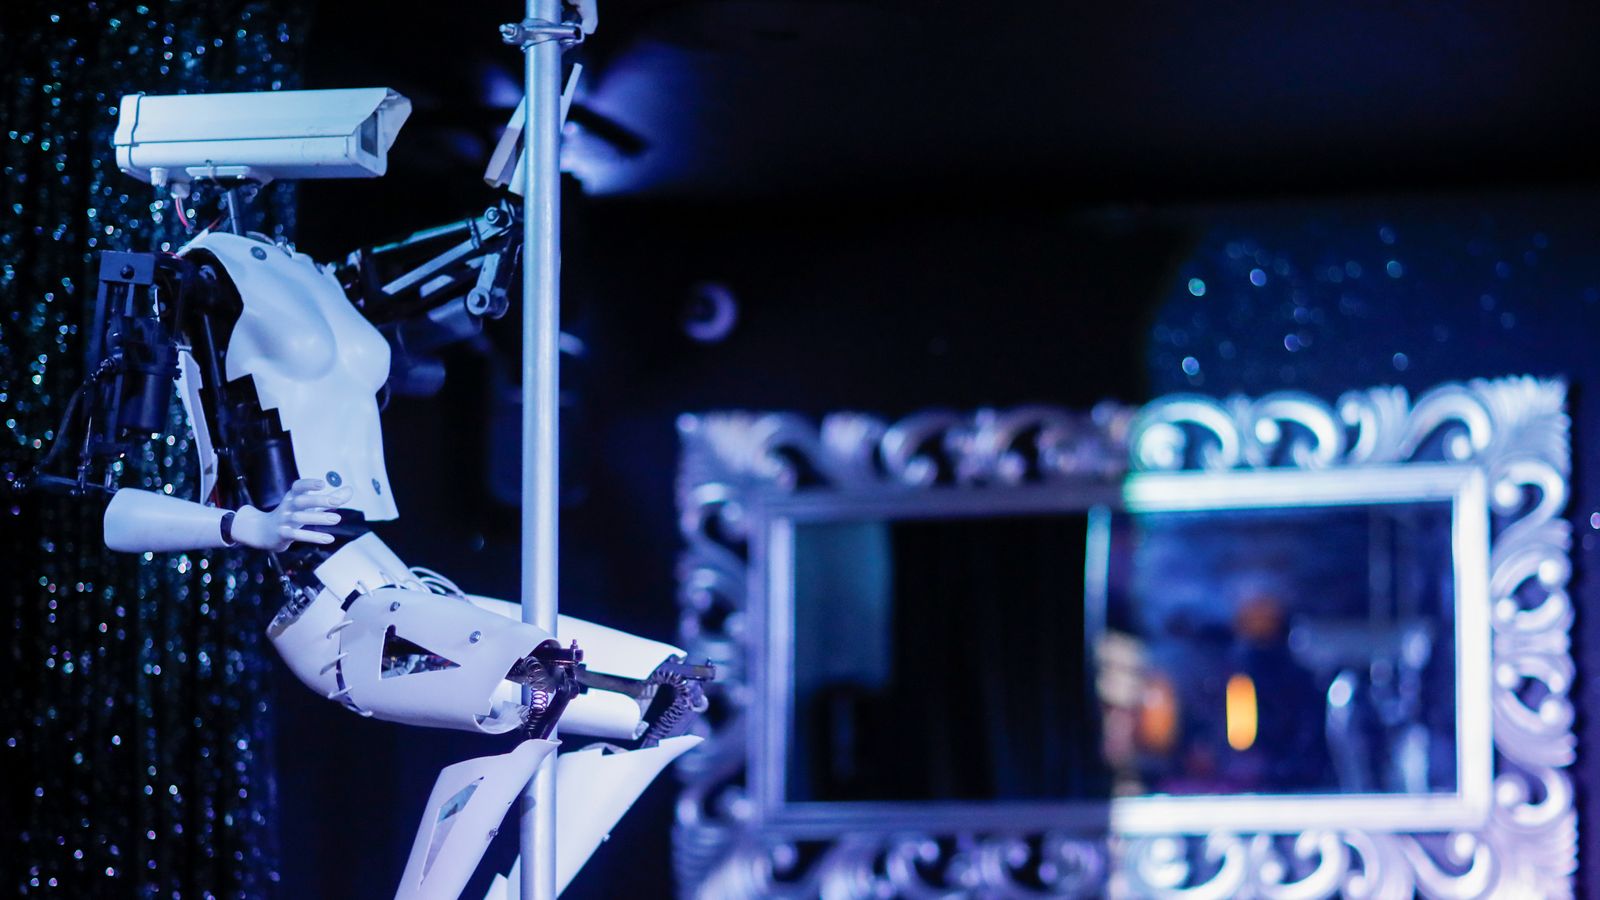 Robot pole dancers to debut at French nightclub